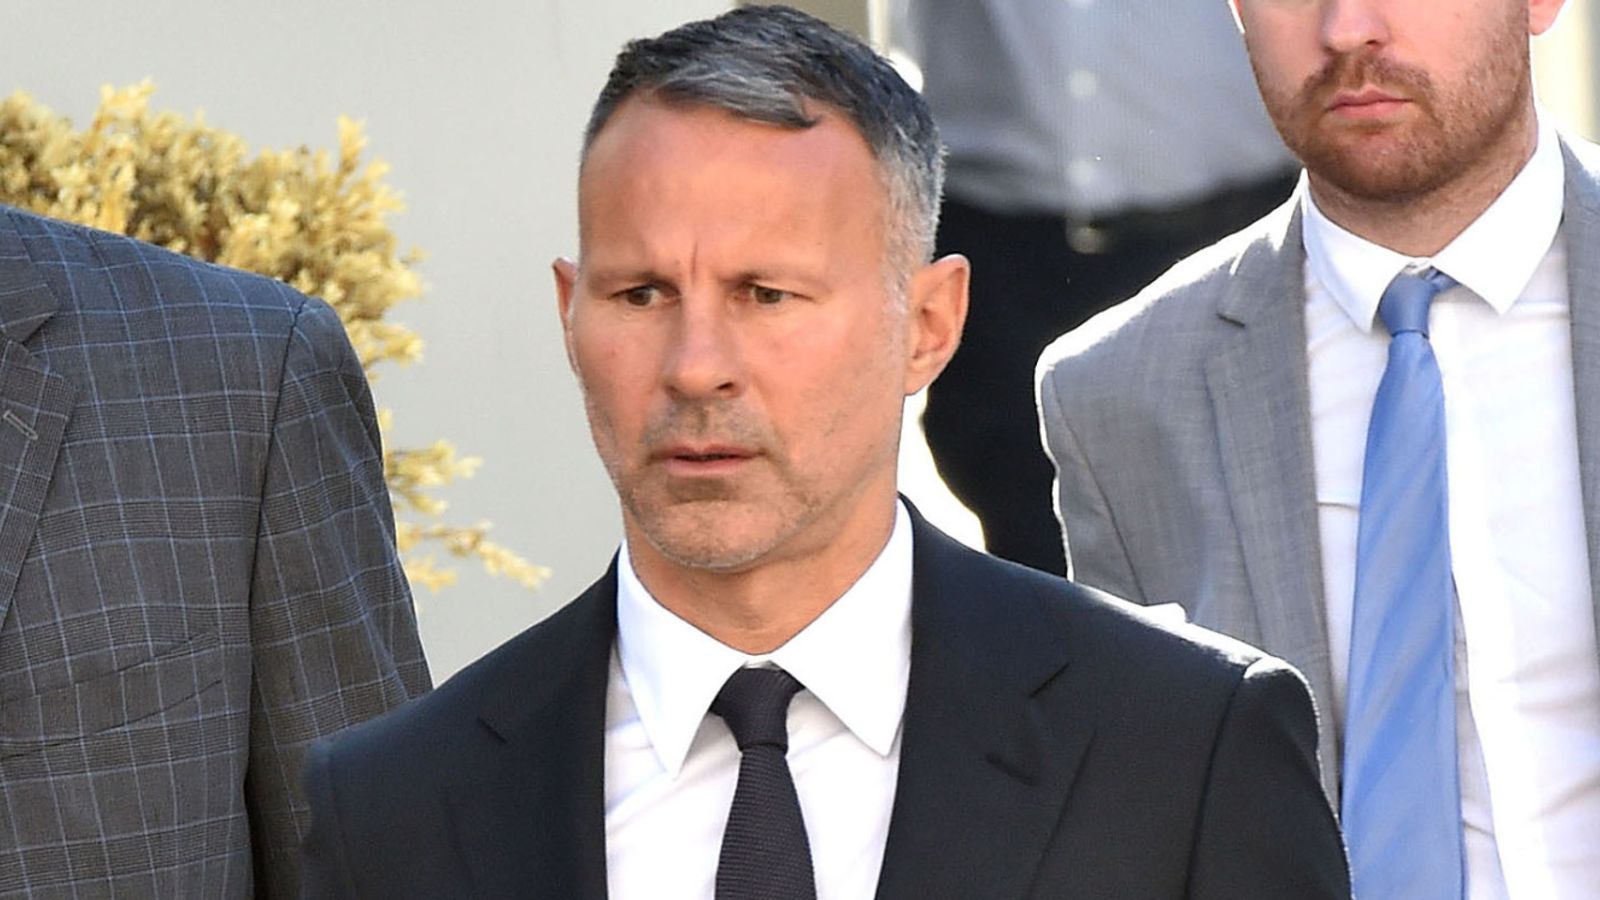 Ryan Giggs trial live: Ex-girlfriend Kate Greville returns to witness box after claiming Man Utd legend ‘looked me in eyes and headbutted me’